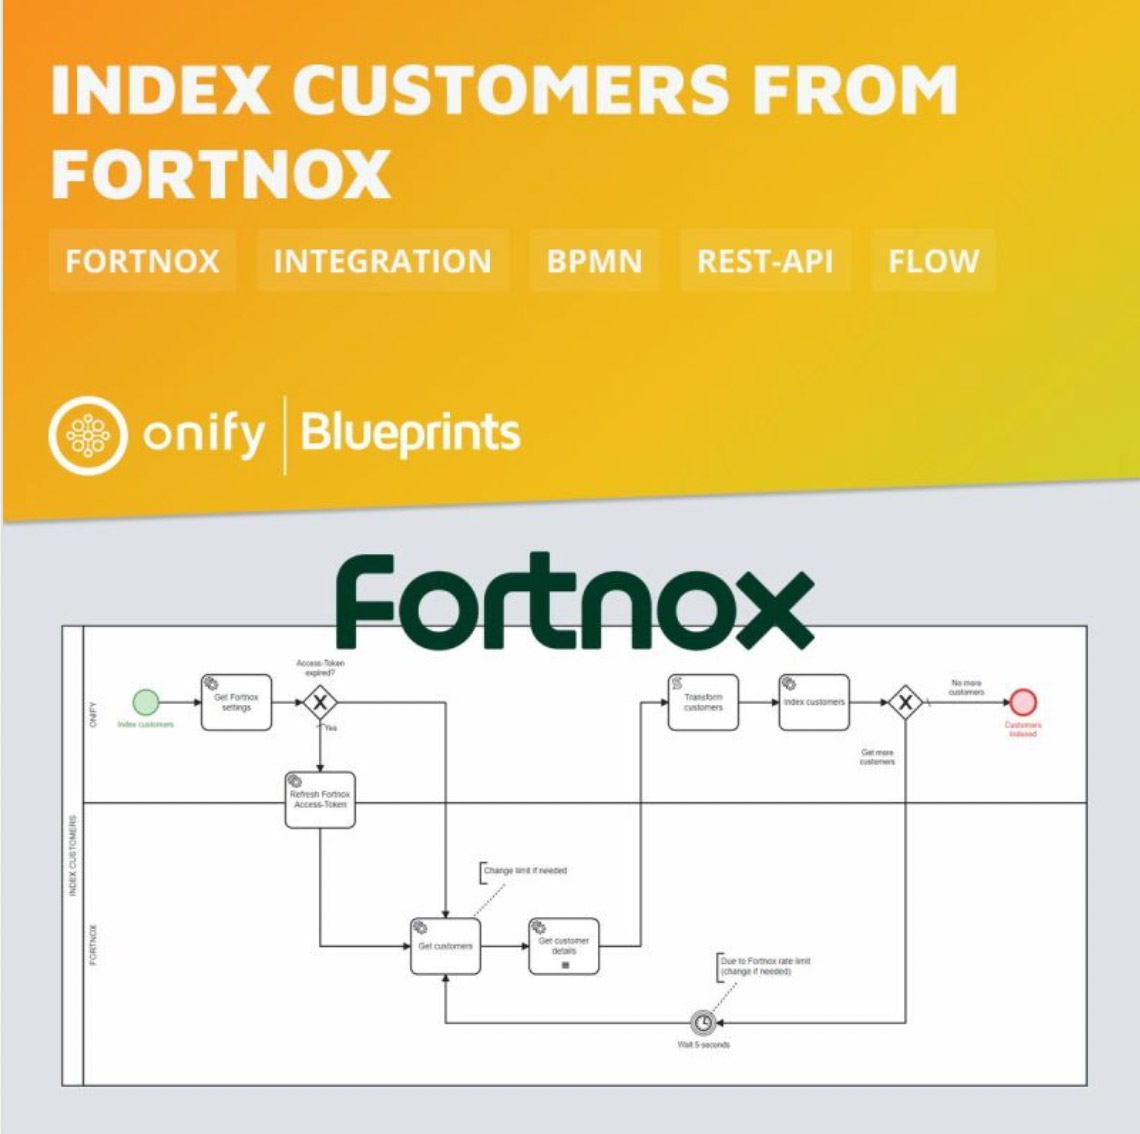 Onify Blueprint – Index customers from Fortnox